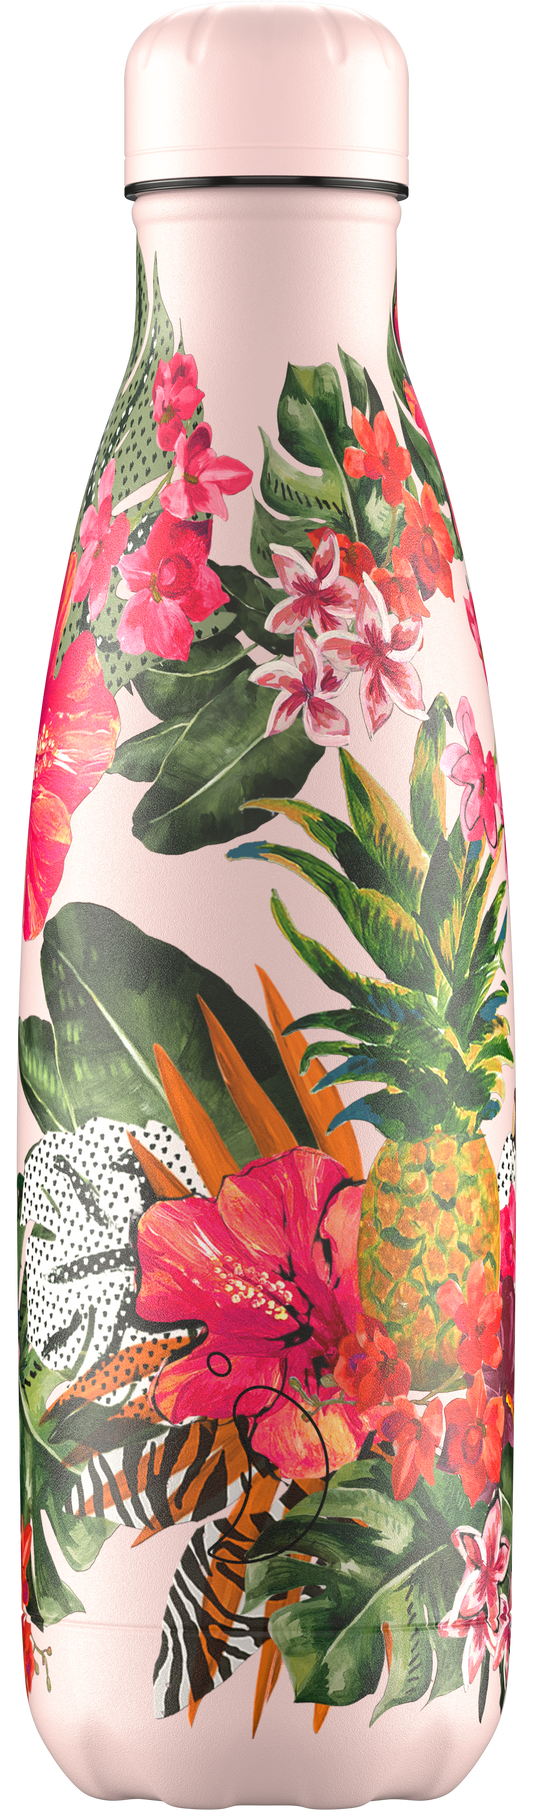 chilly's bottle tropical edition with a hidden toucan